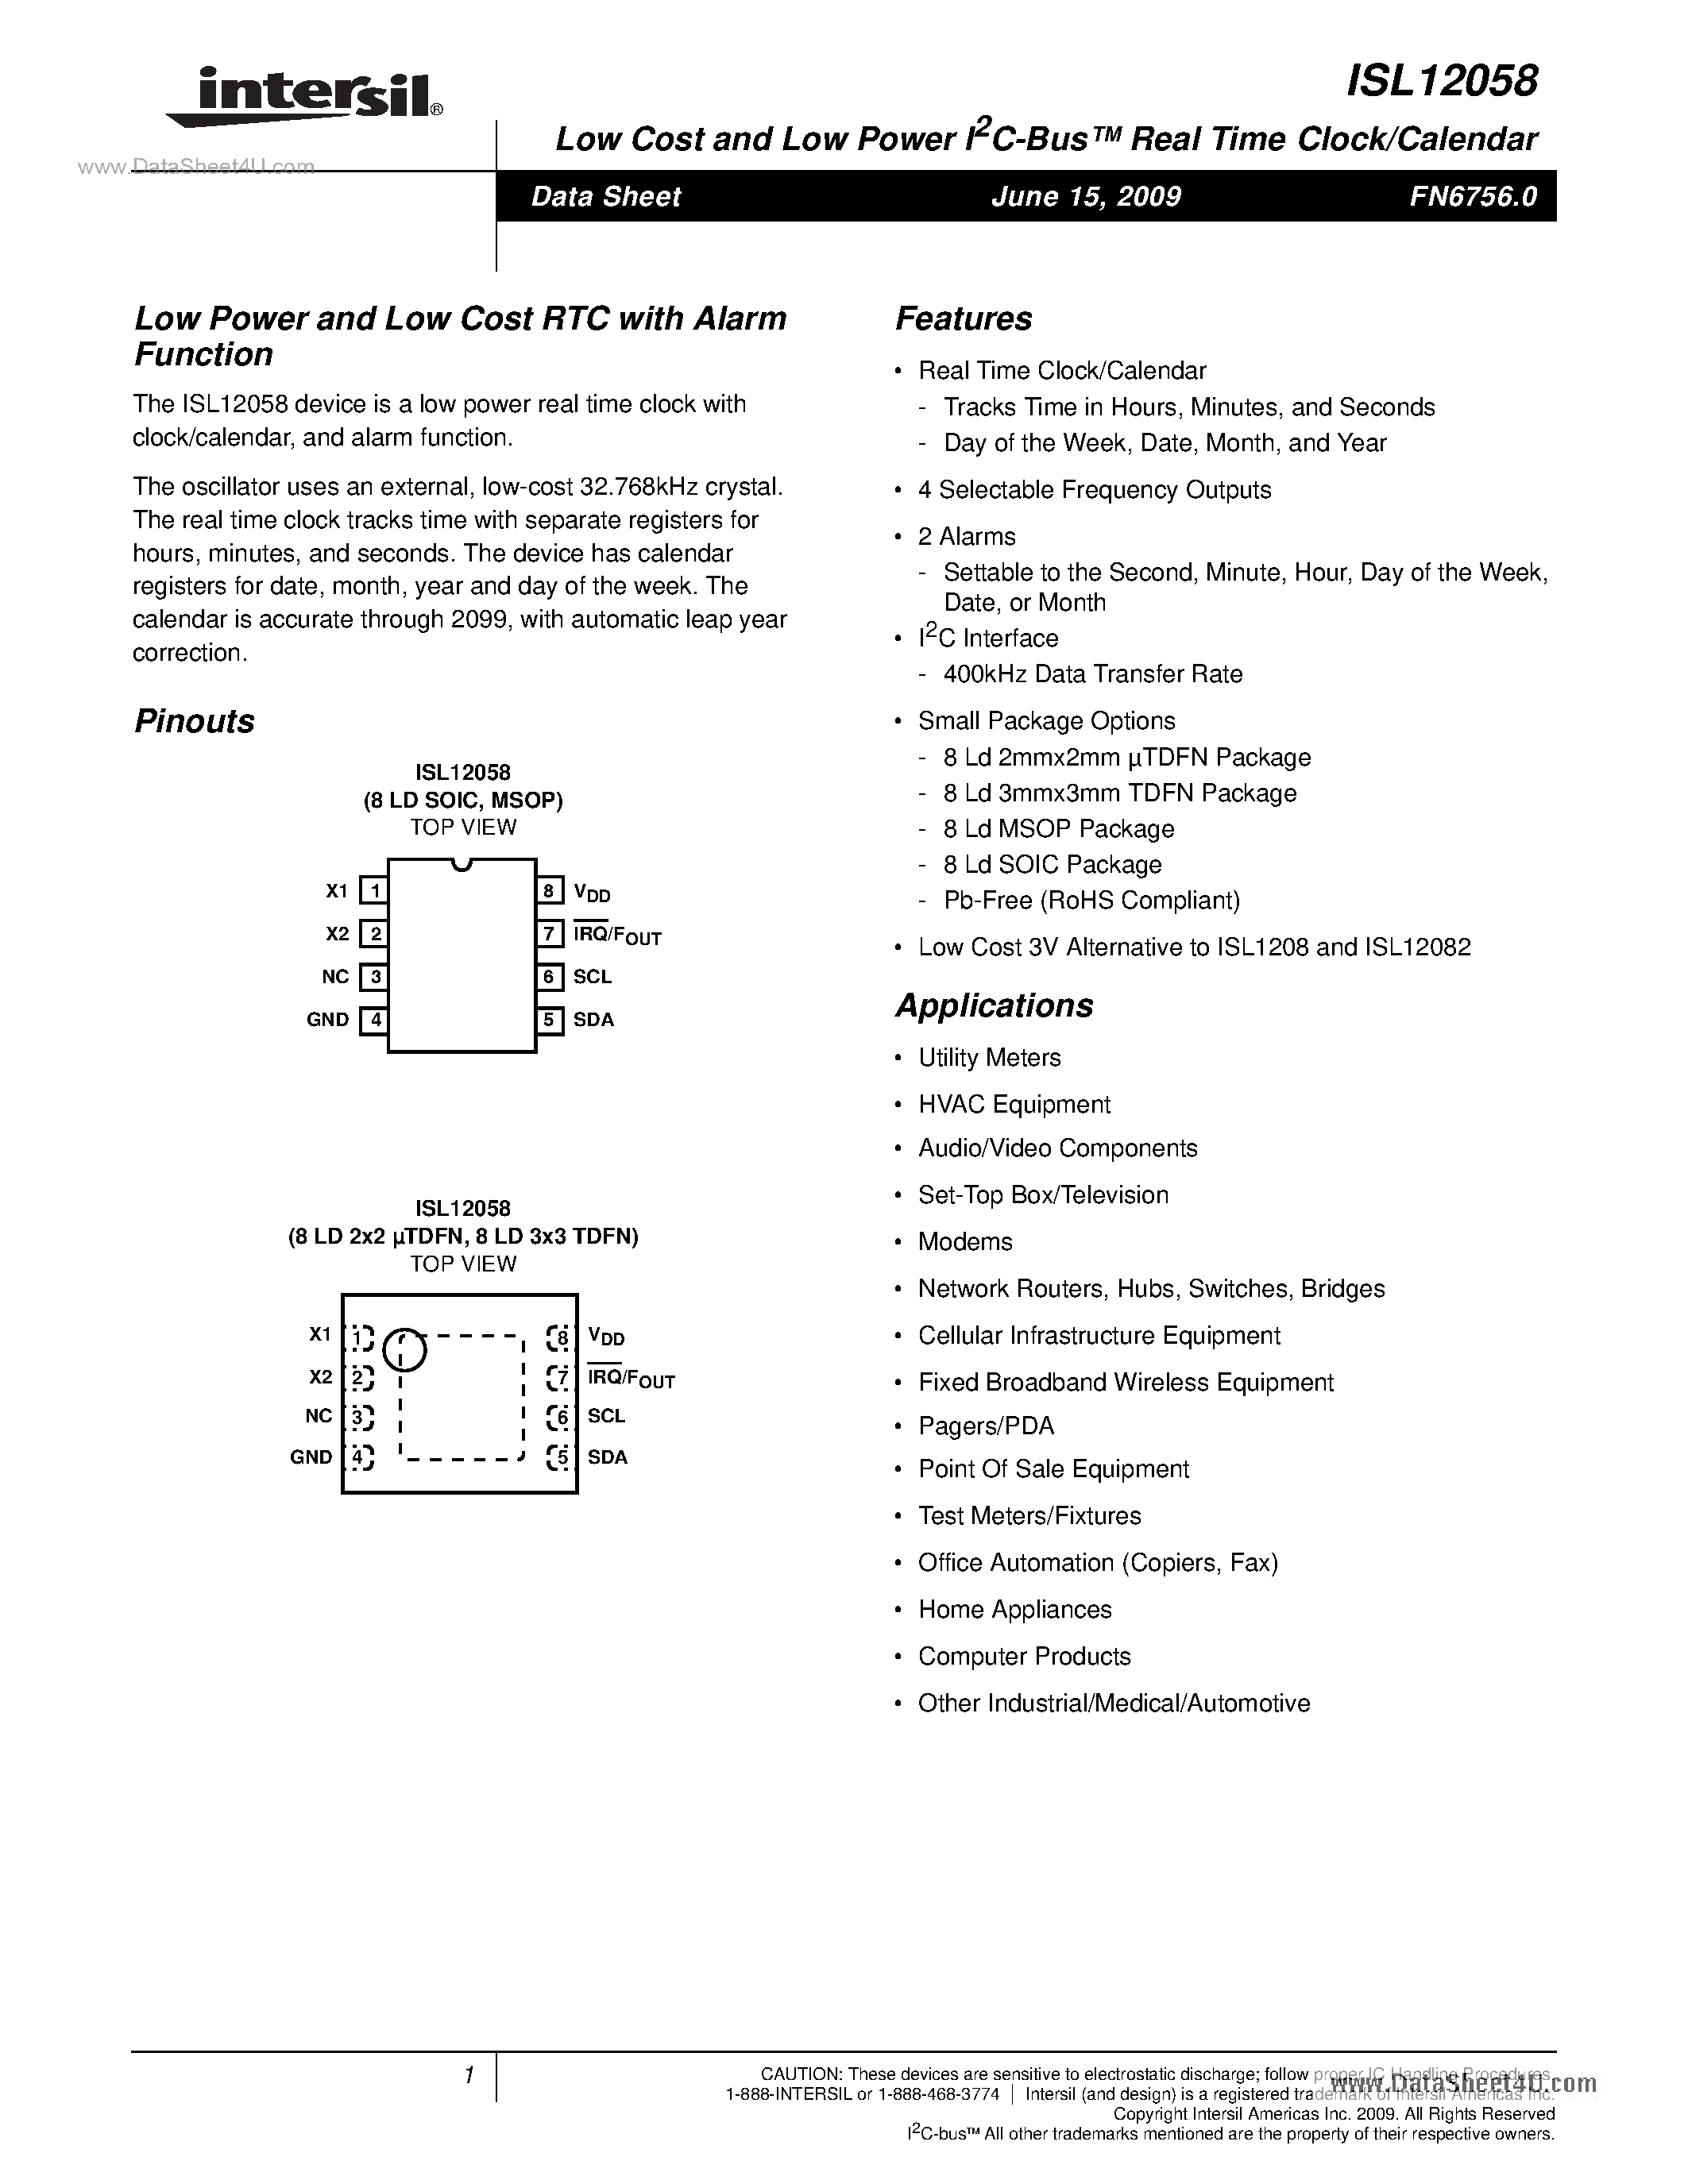 Datasheet ISL12058 - Low Cost and Low Power I2C-Bus Real Time Clock/Calendar page 1